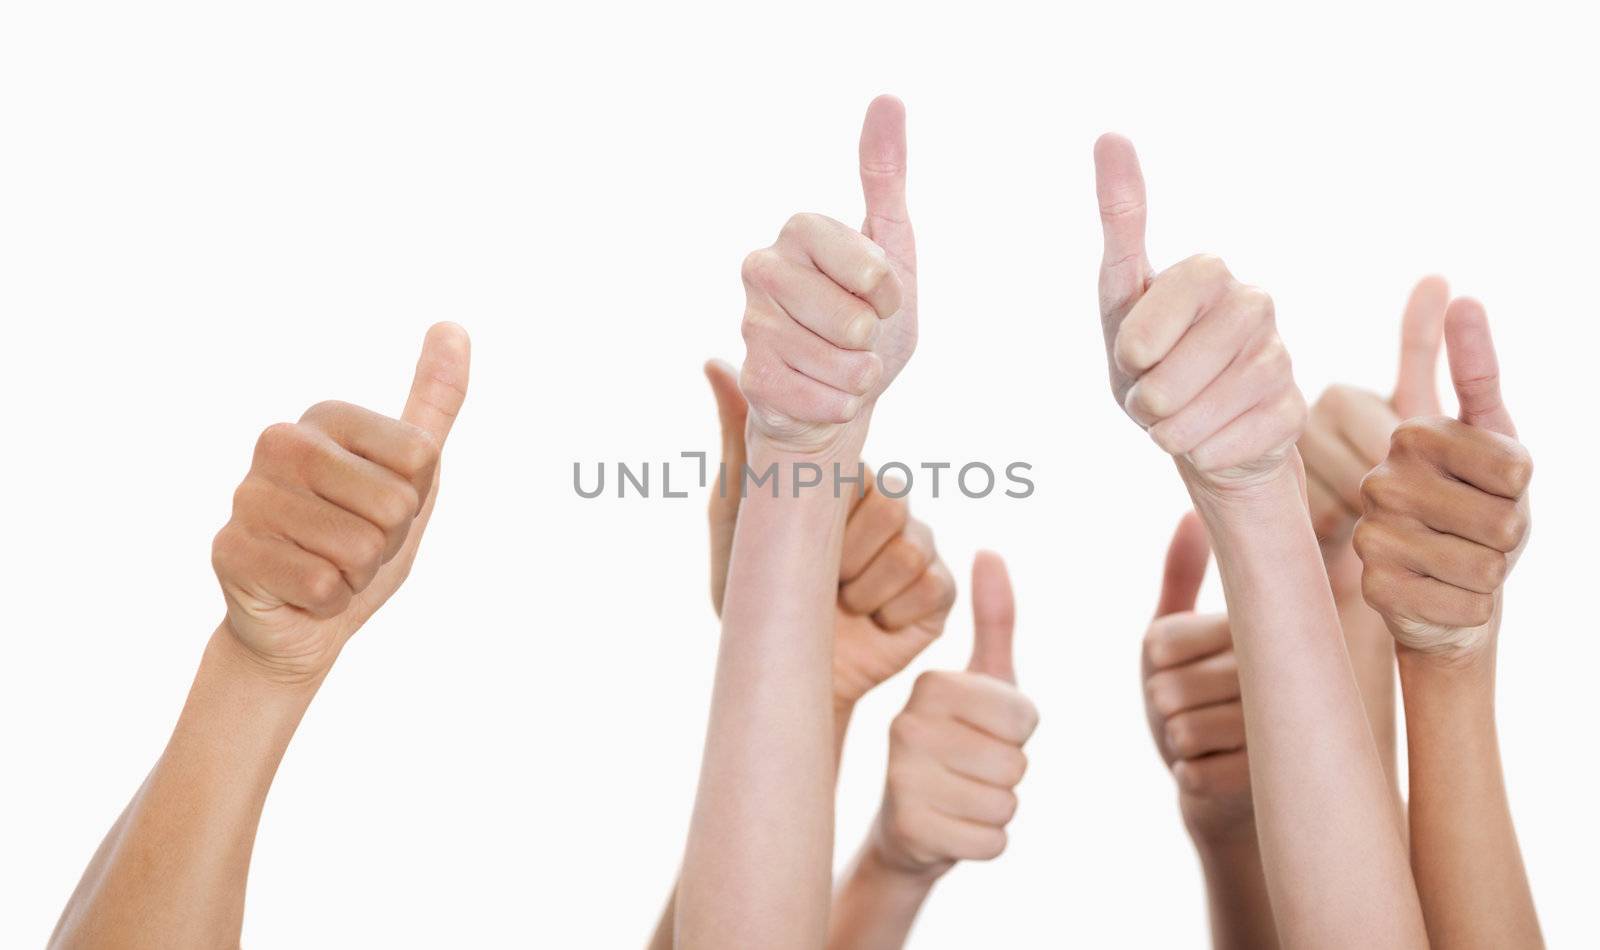 Hands up and thumbs raised against white background